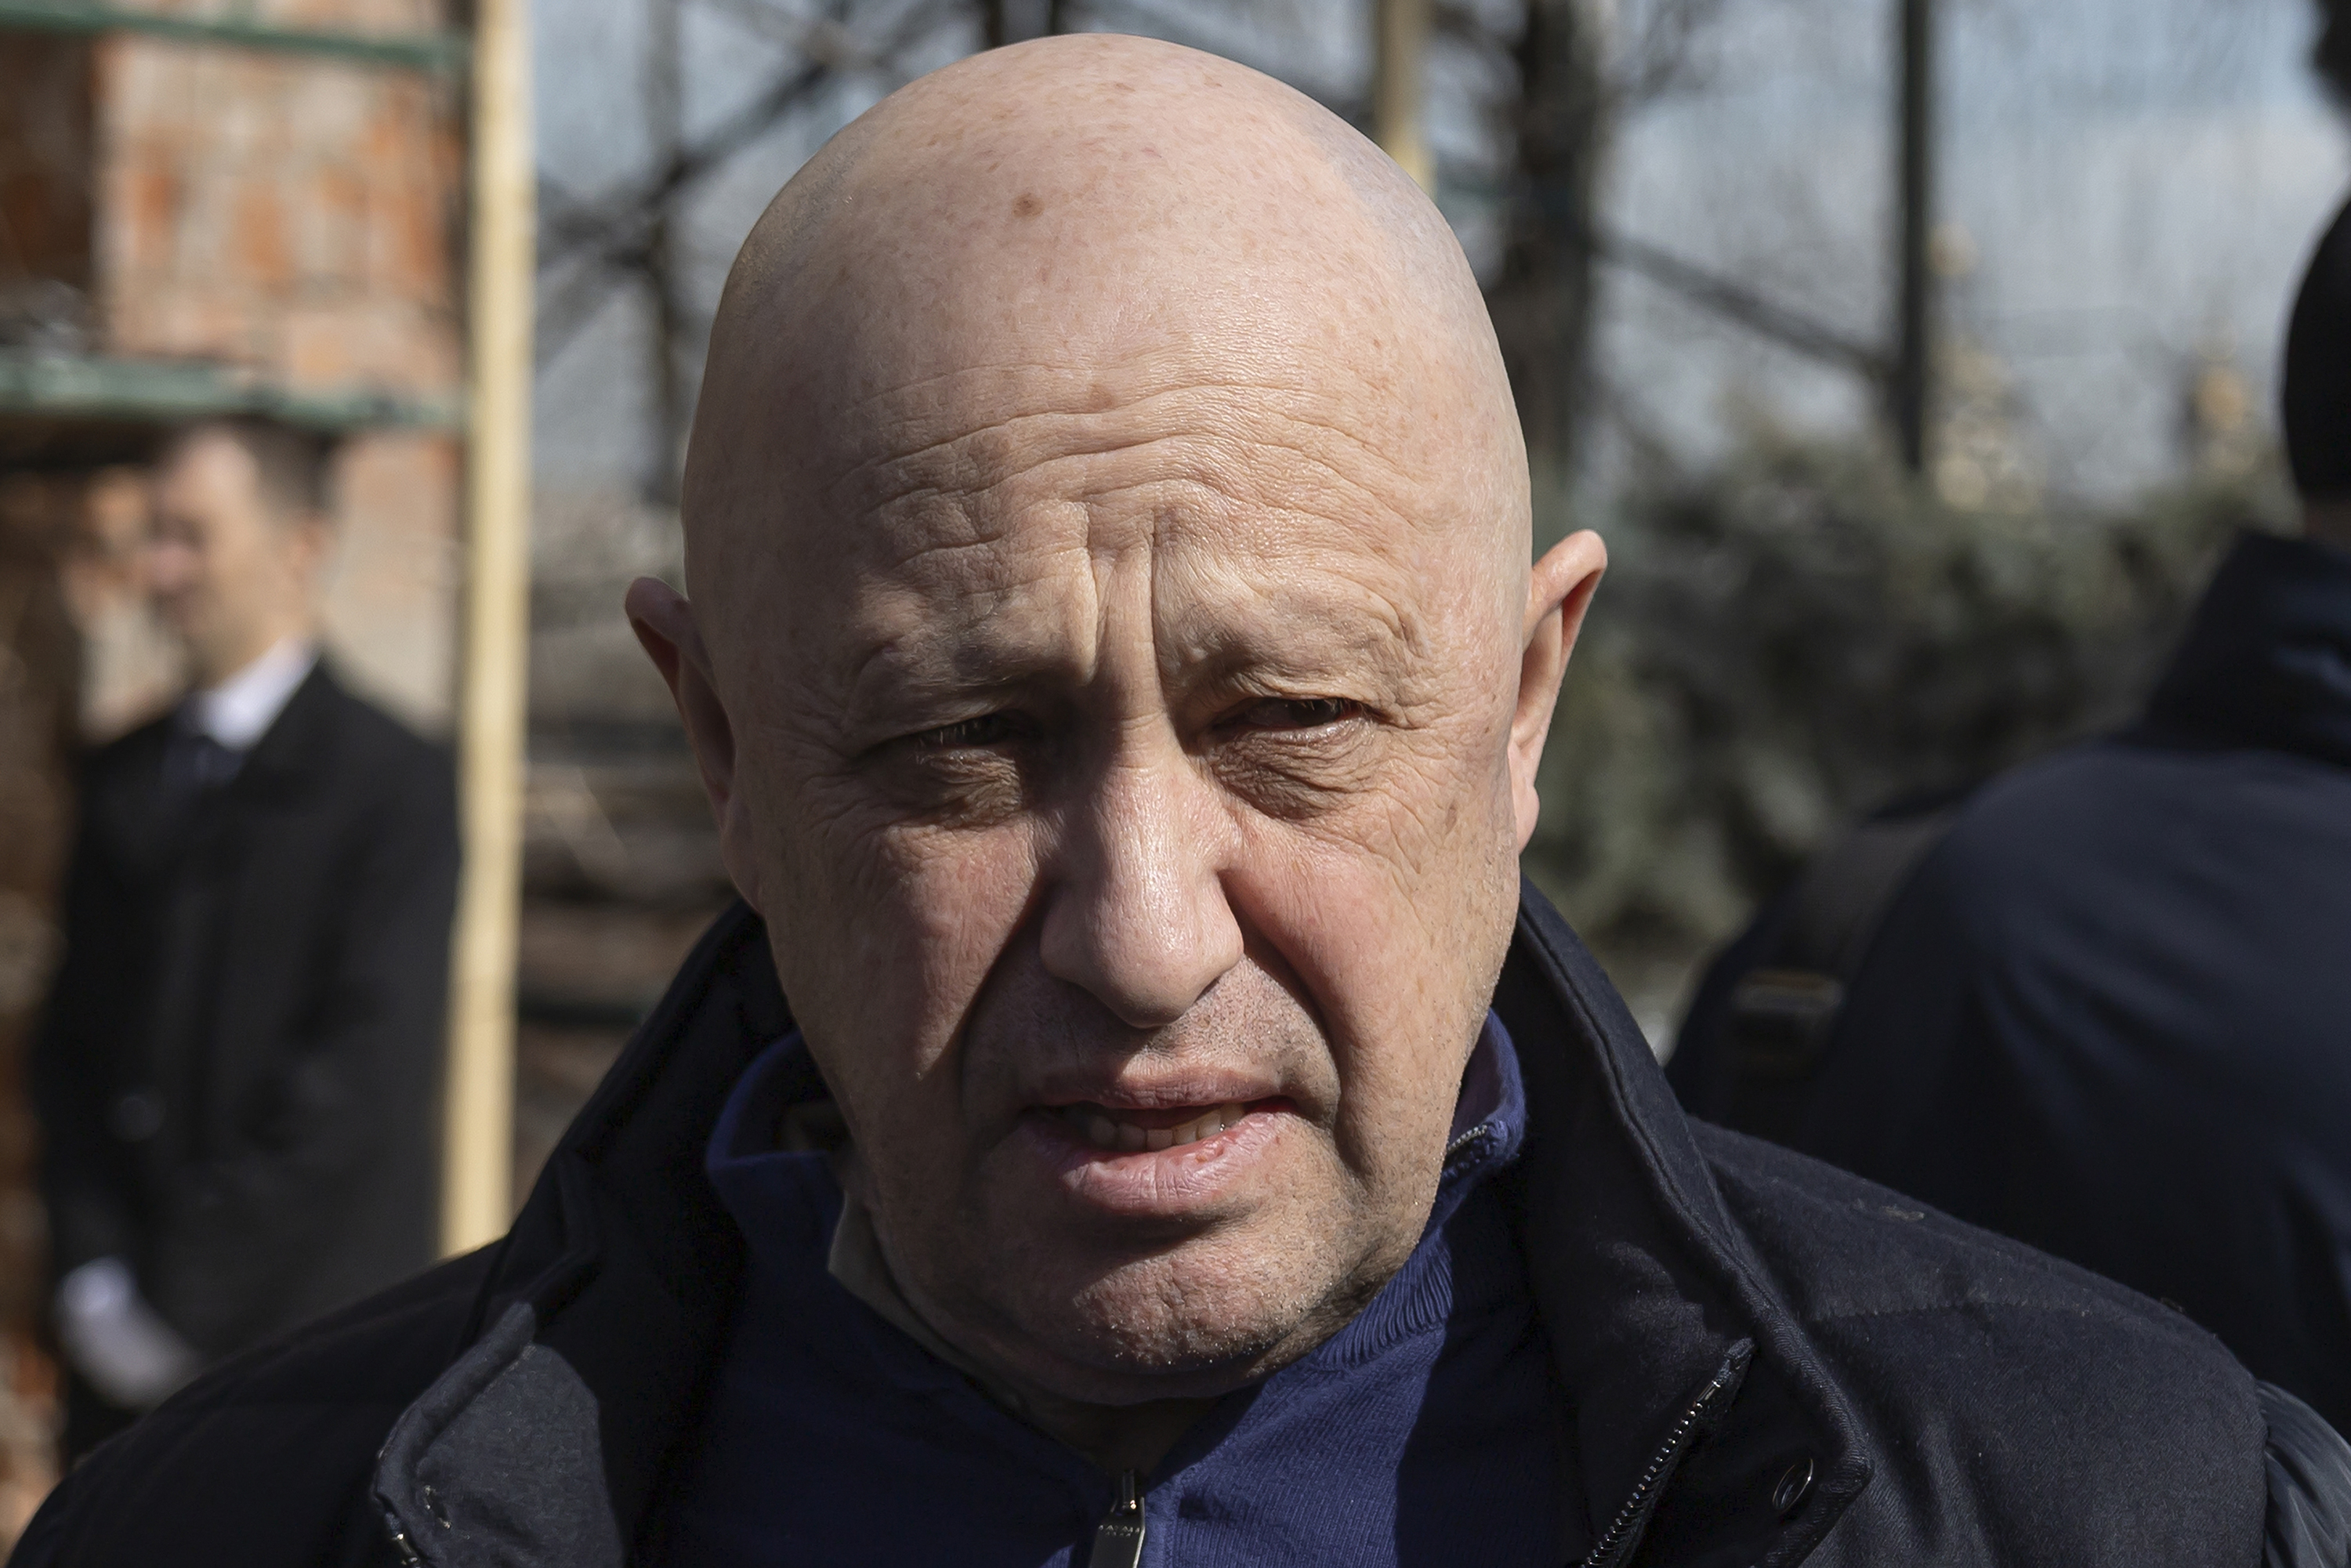 Yevgeny Prigozhin, the owner of the Wagner Group military company, arrives during a funeral ceremony at the Troyekurovskoye cemetery in Moscow, Russia, Saturday, April 8.